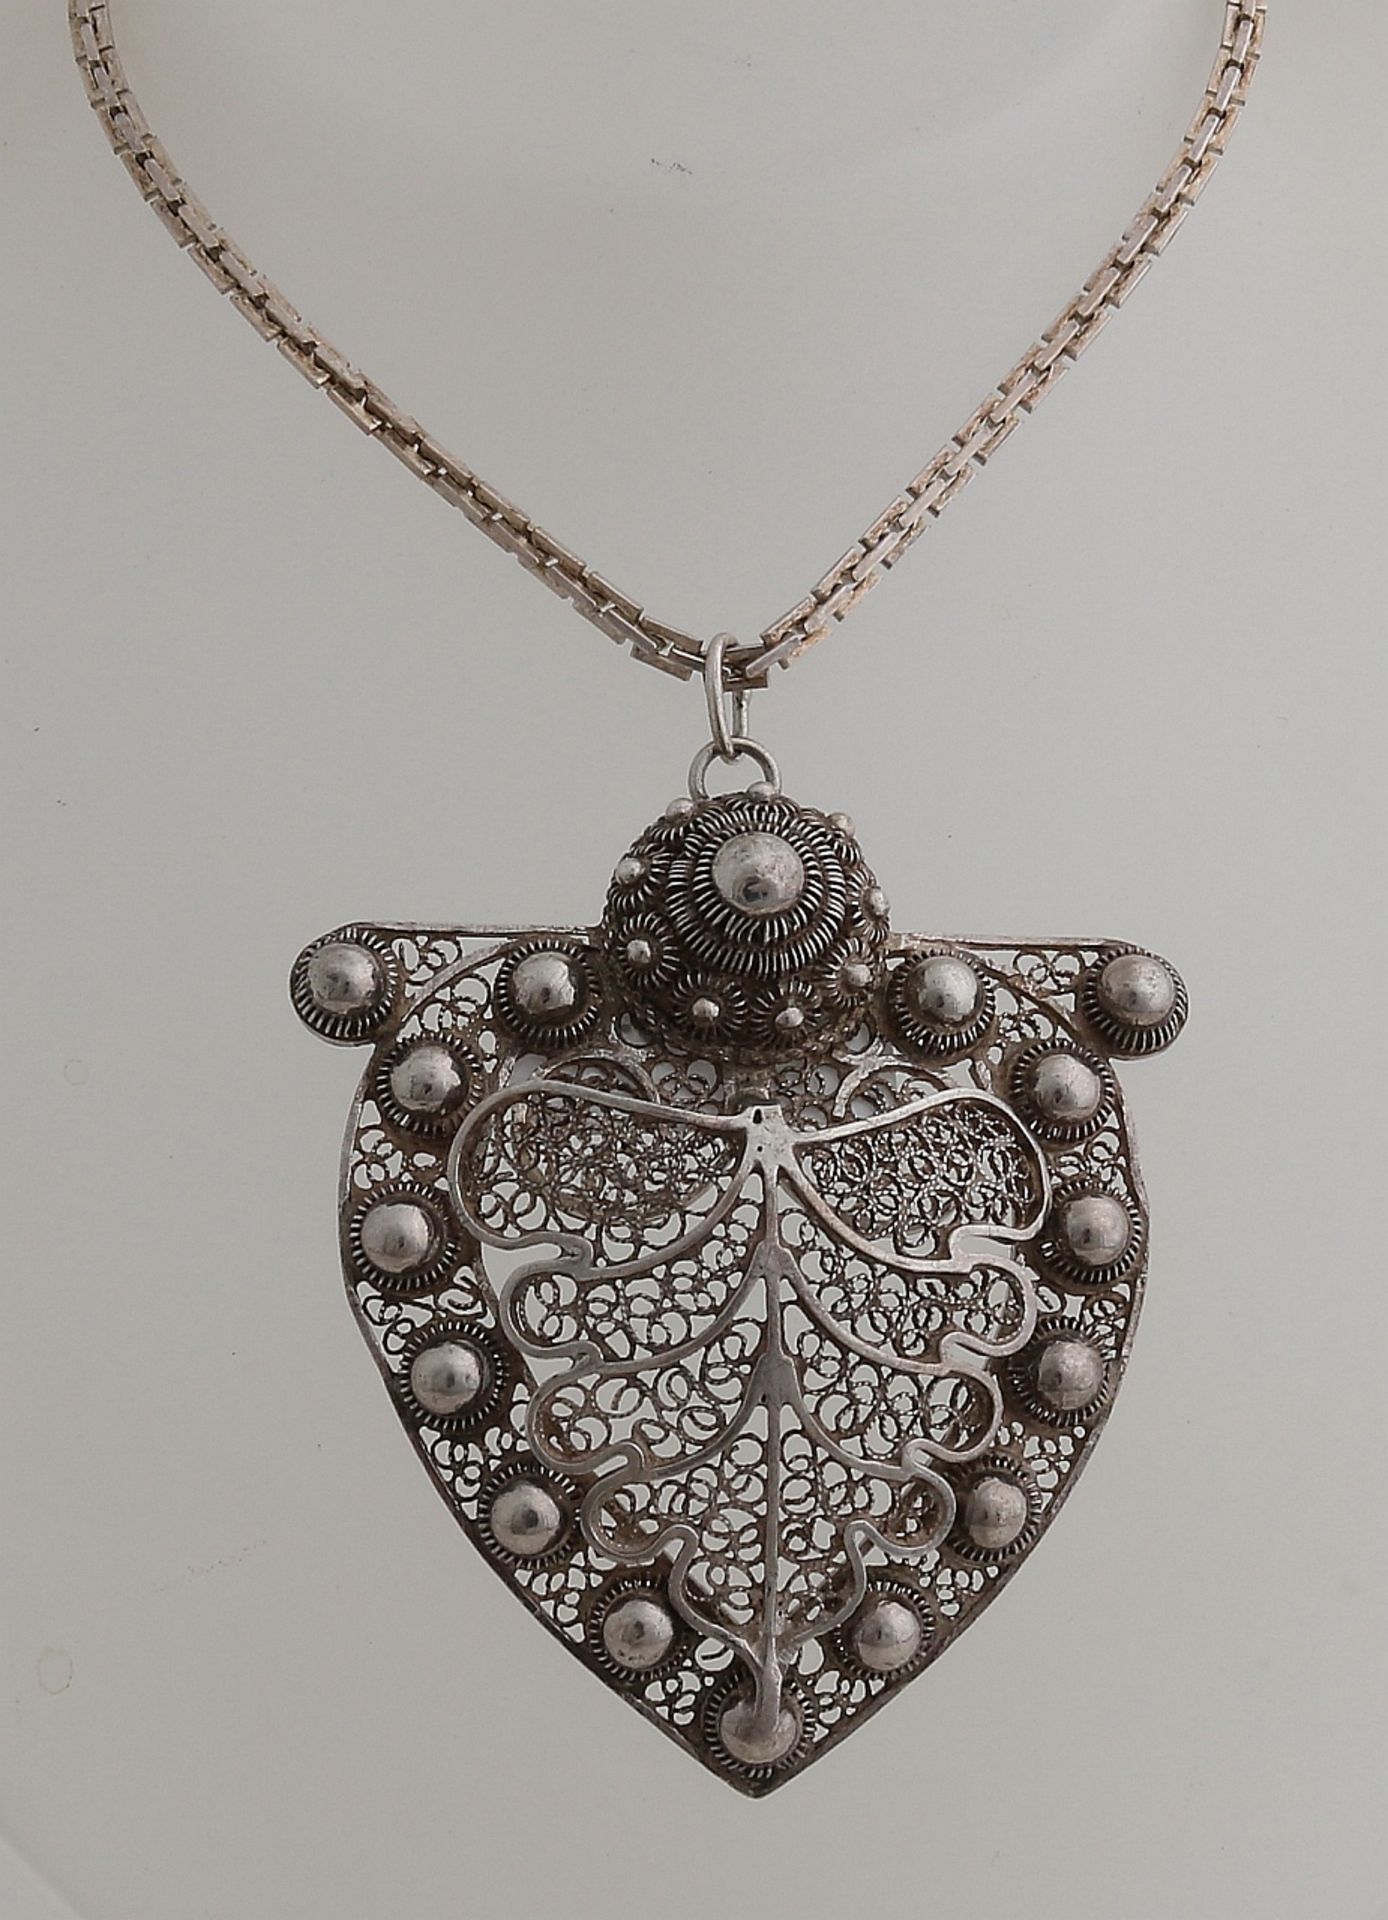 Silver necklace with filigree pendant